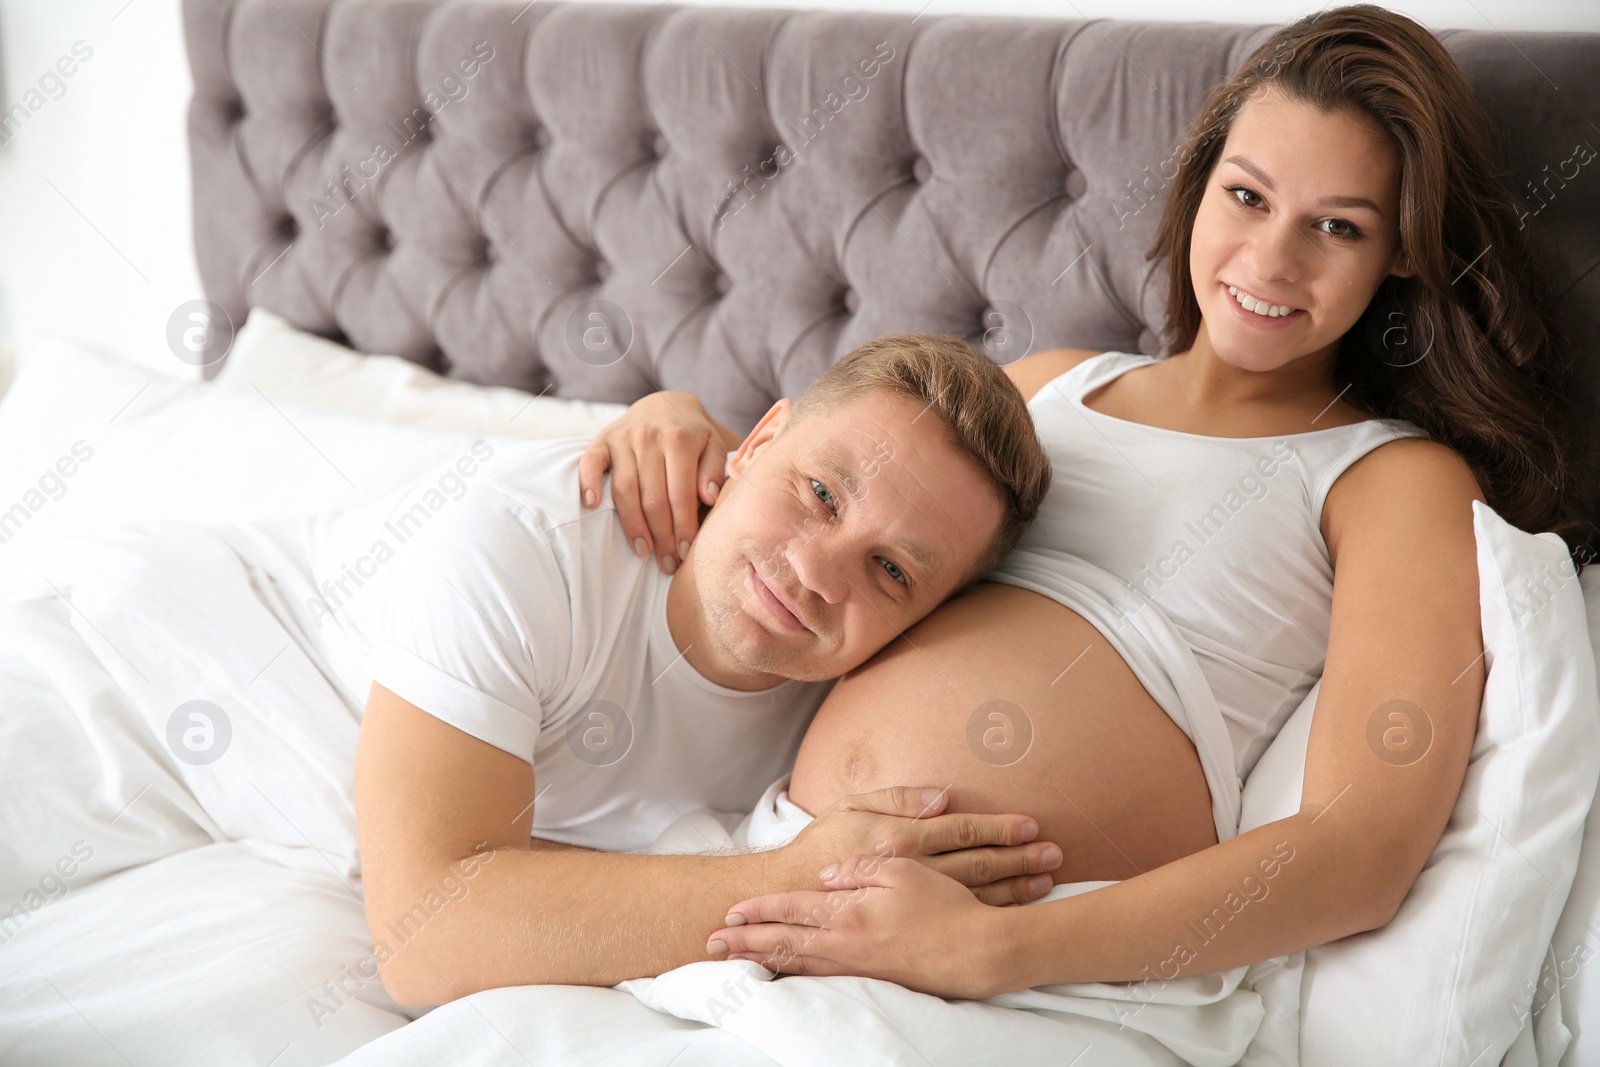 Photo of Pregnant woman with her husband in bedroom. Happy young family